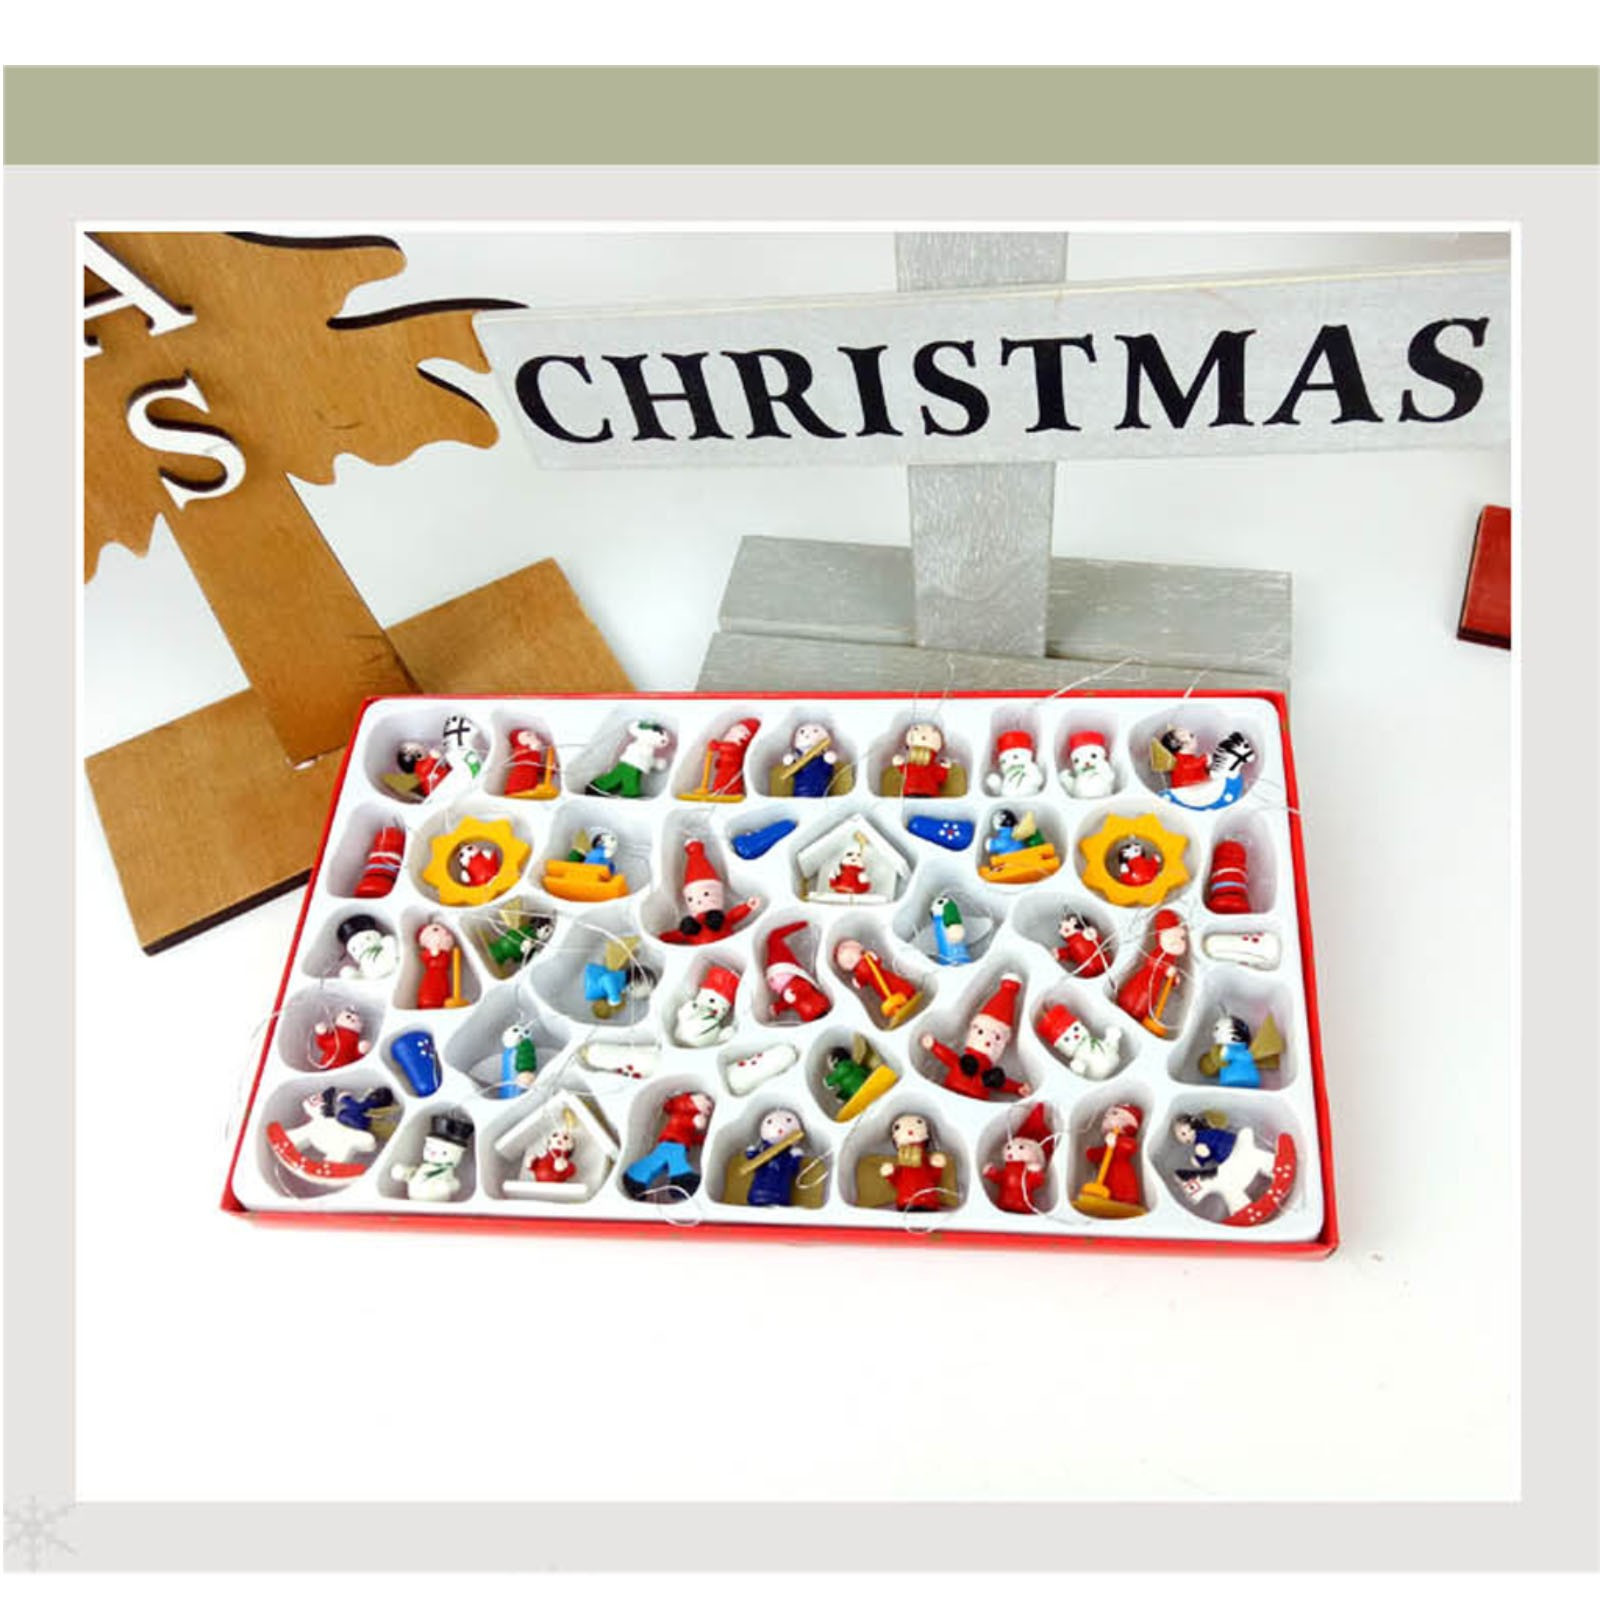 SDJMa 48 Pieces Mini Christmas Ornaments Wooden Ornaments Miniature  Christmas Tree Ornaments Tiny Christmas Pendant Decoration with Holiday  Gift Box for Christmas Tree Decorations 